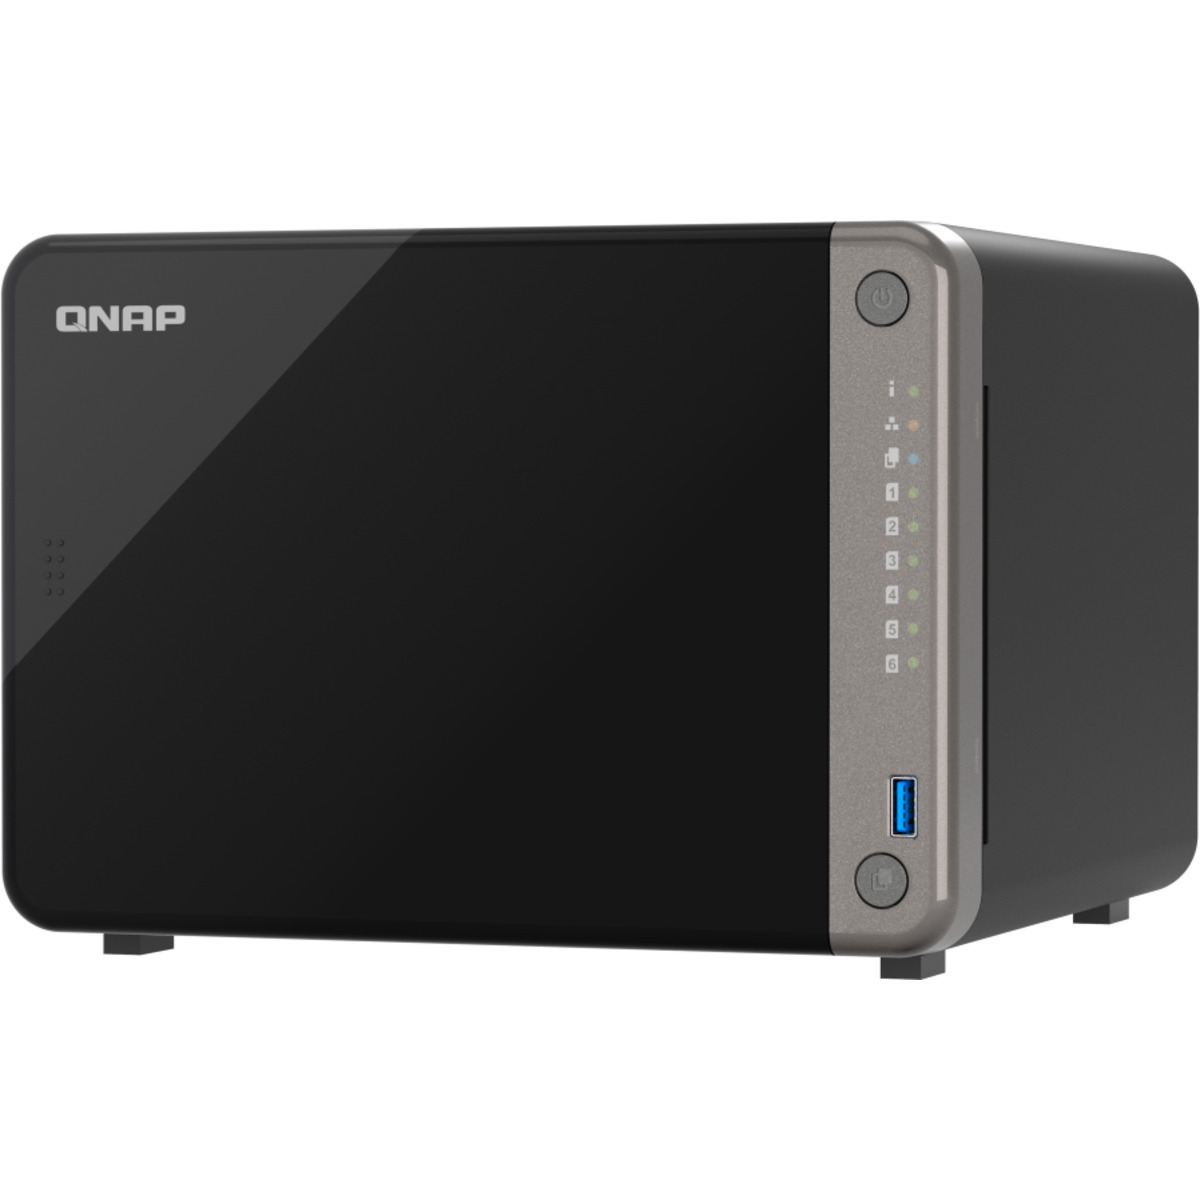 QNAP TS-AI642 1.5tb 6-Bay Desktop Multimedia / Power User / Business NAS - Network Attached Storage Device 3x500gb Sandisk Ultra 3D SDSSDH3-500G 2.5 560/520MB/s SATA 6Gb/s SSD CONSUMER Class Drives Installed - Burn-In Tested TS-AI642